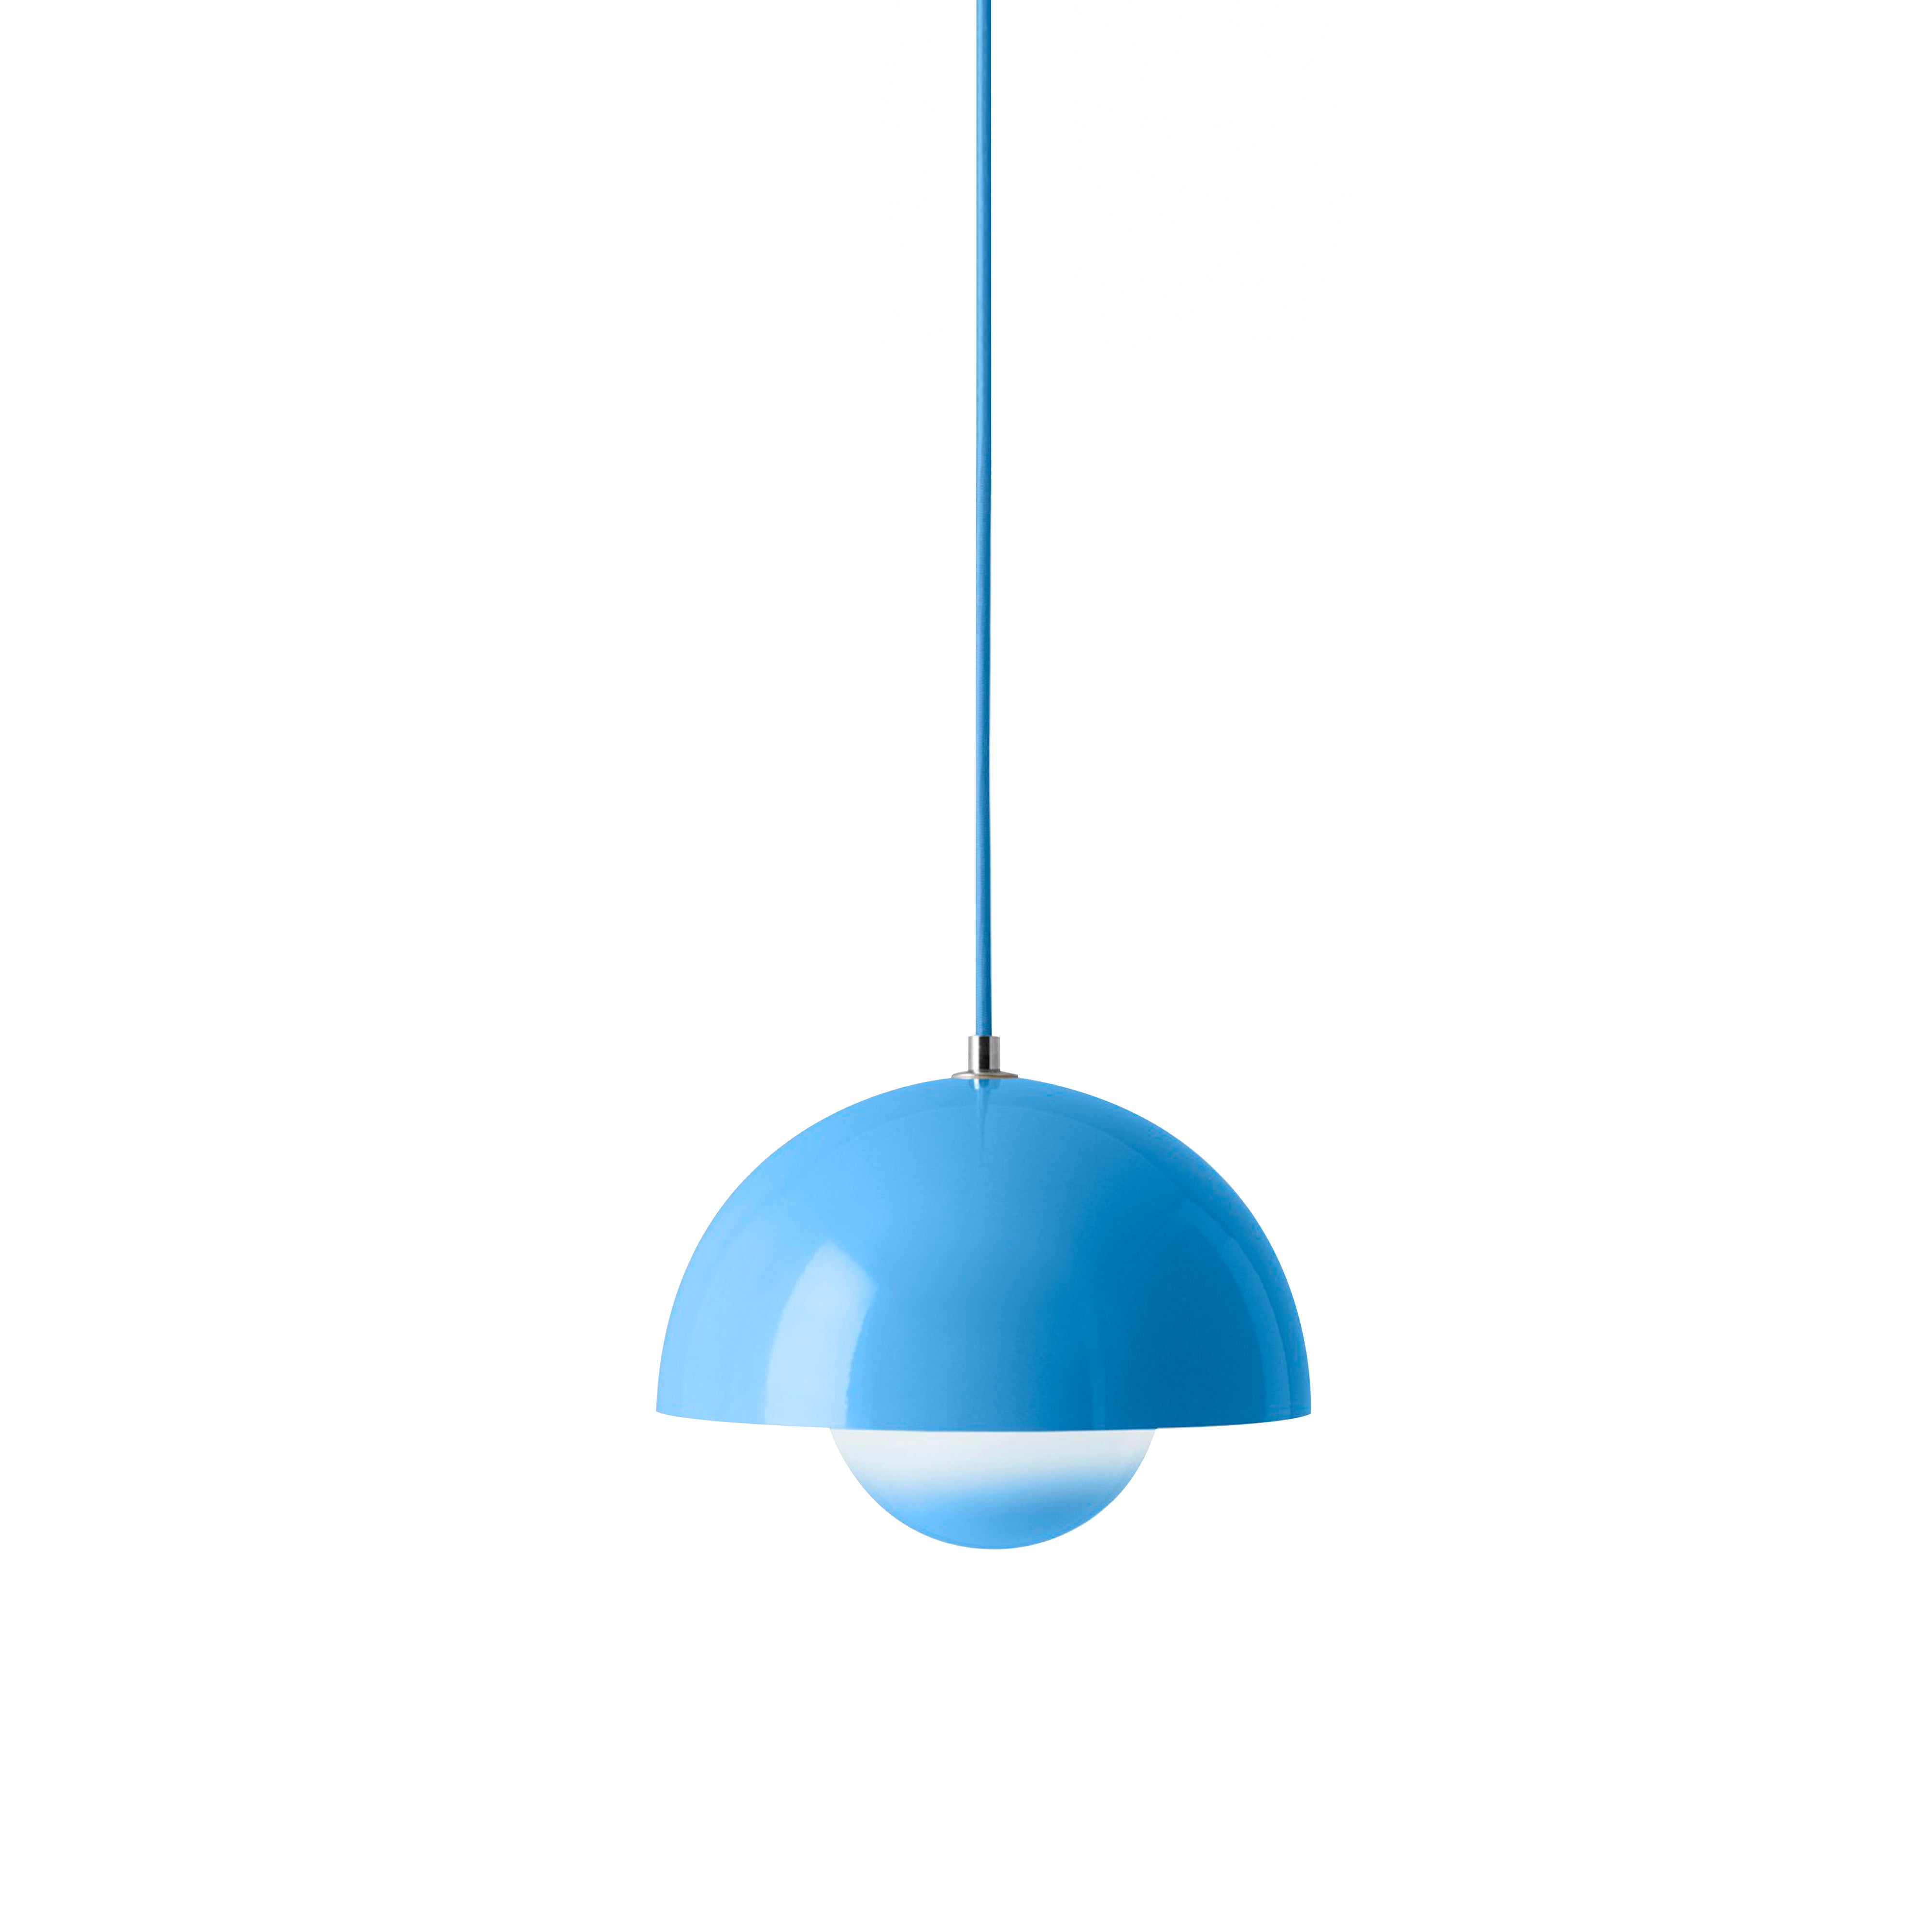 Flowerpot VP1 Pendant | Buy &Tradition online at A+R